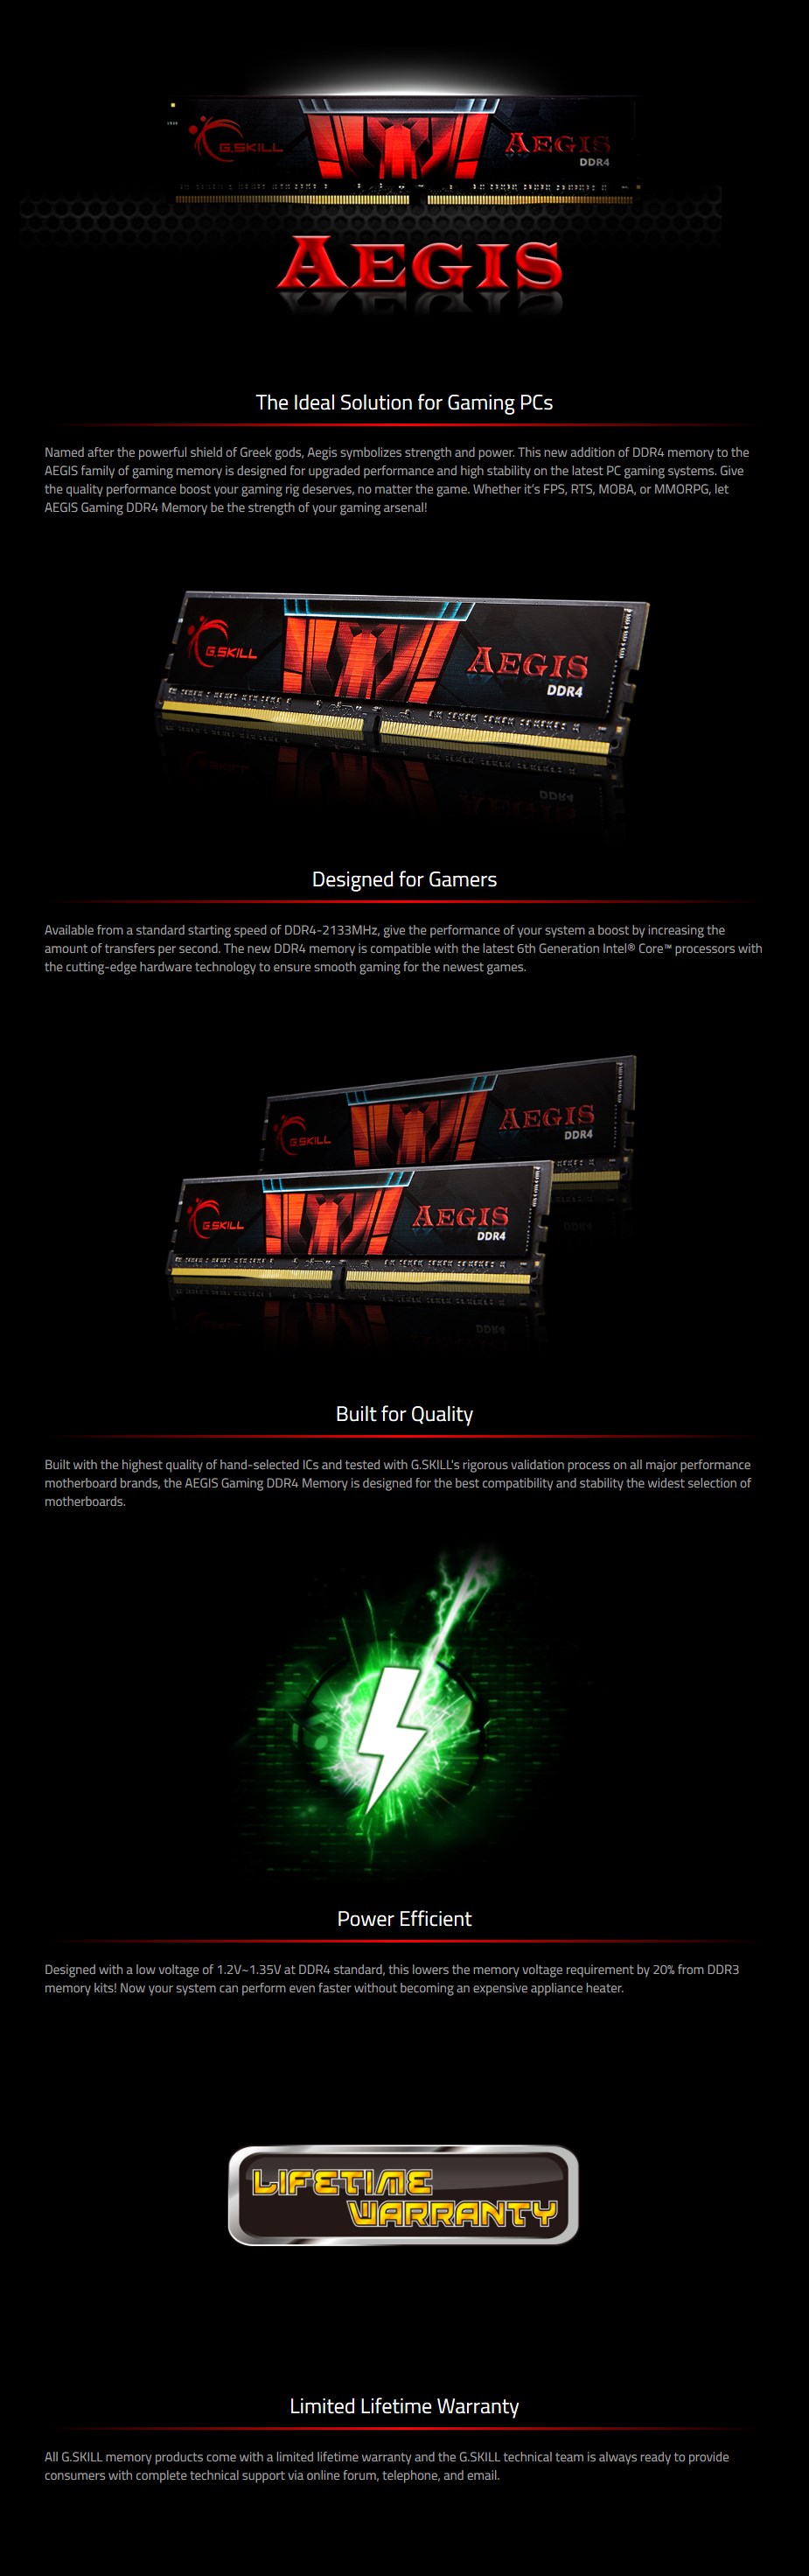 A large marketing image providing additional information about the product G.Skill 8GB Kit (1x8GB) DDR4 Aegis CL16 3200MHz - Black - Additional alt info not provided